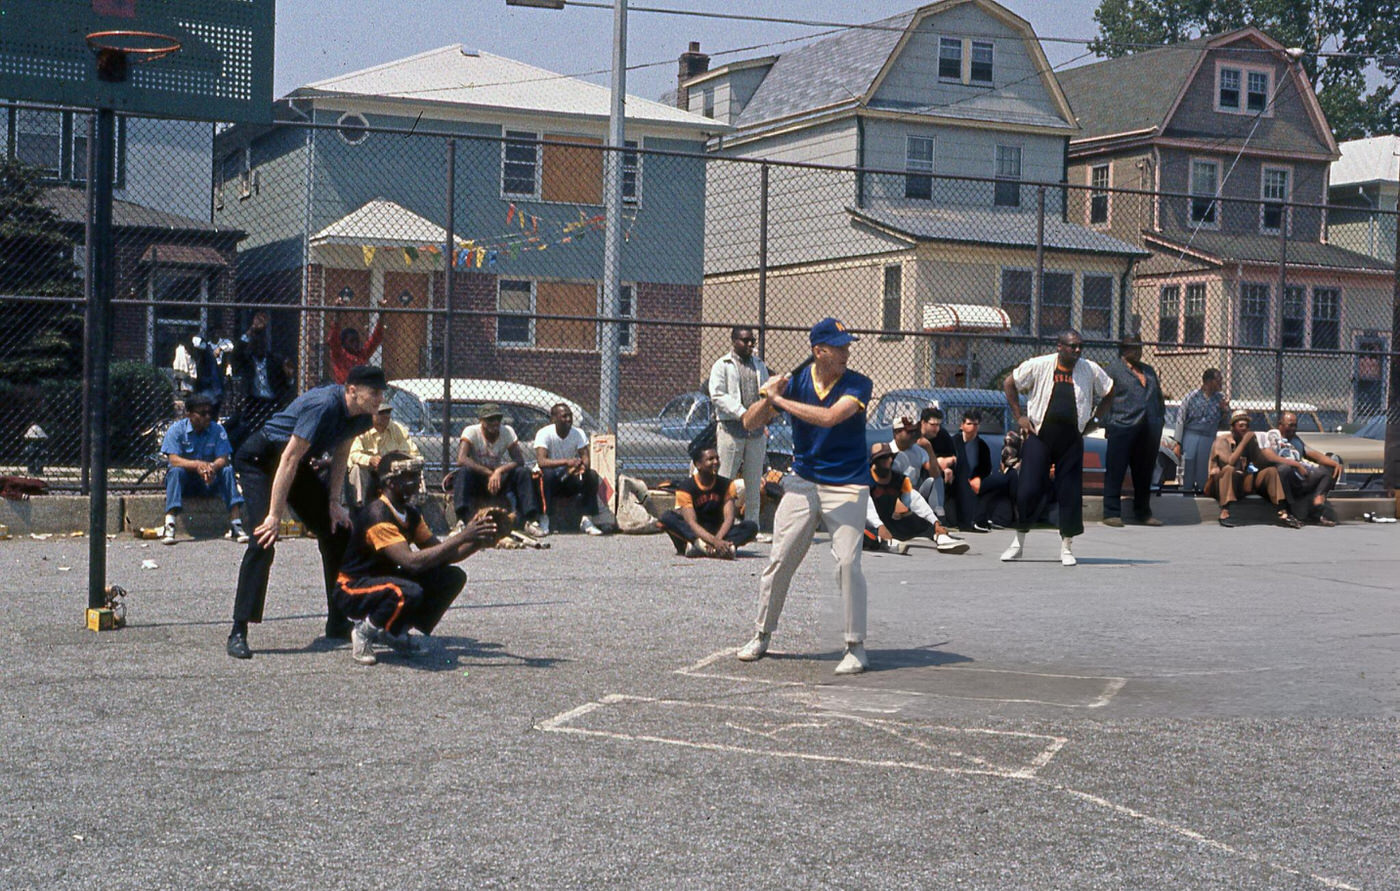 A Man Is At Bat During A Softball Game In The Ps 143 (Later Named Ps 143 Louis Armstrong) School Yard In Corona, 1960S.